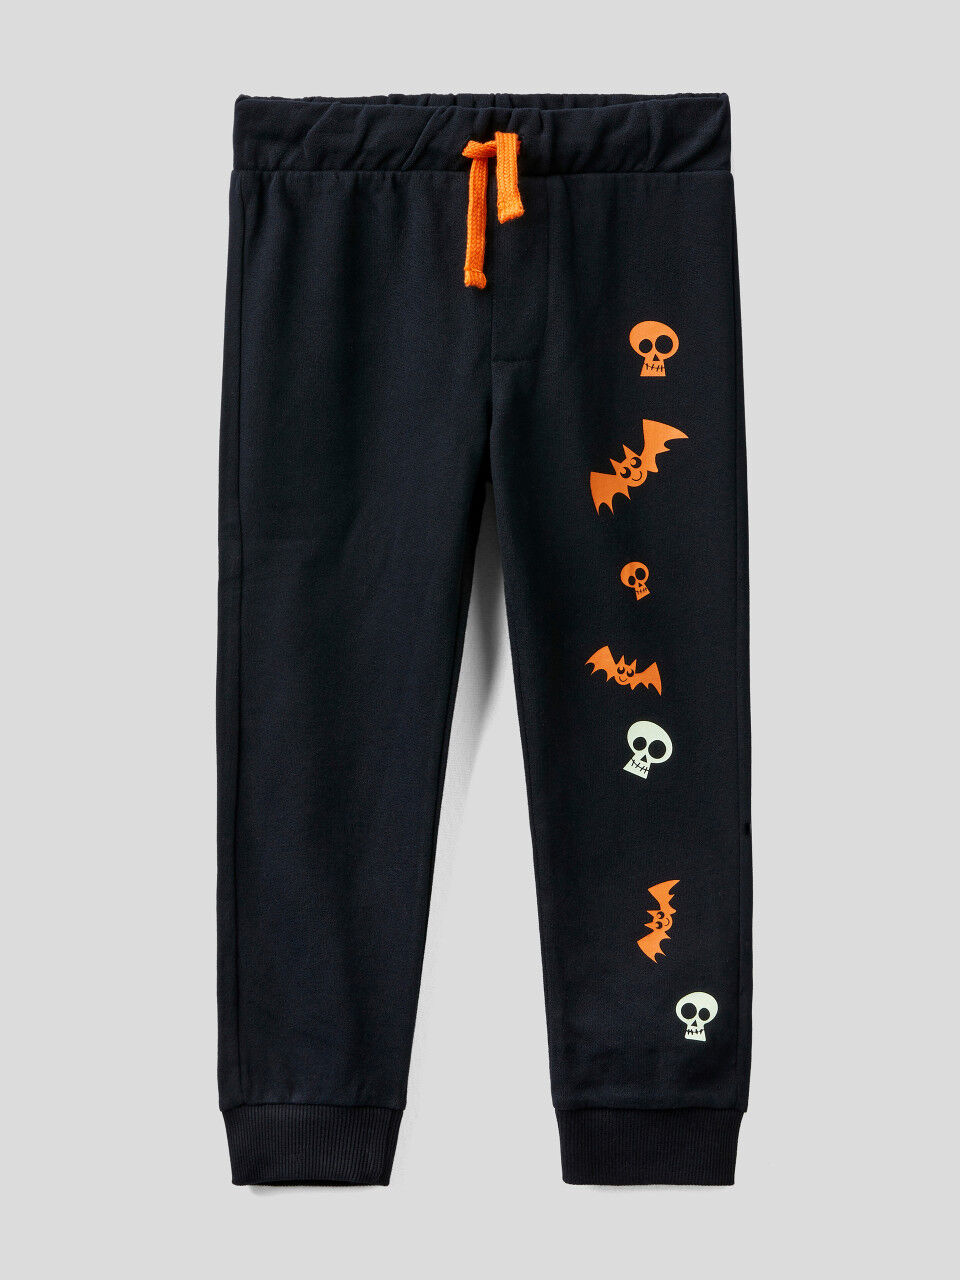 Scooby-Doo joggers with glow-in-the-dark print